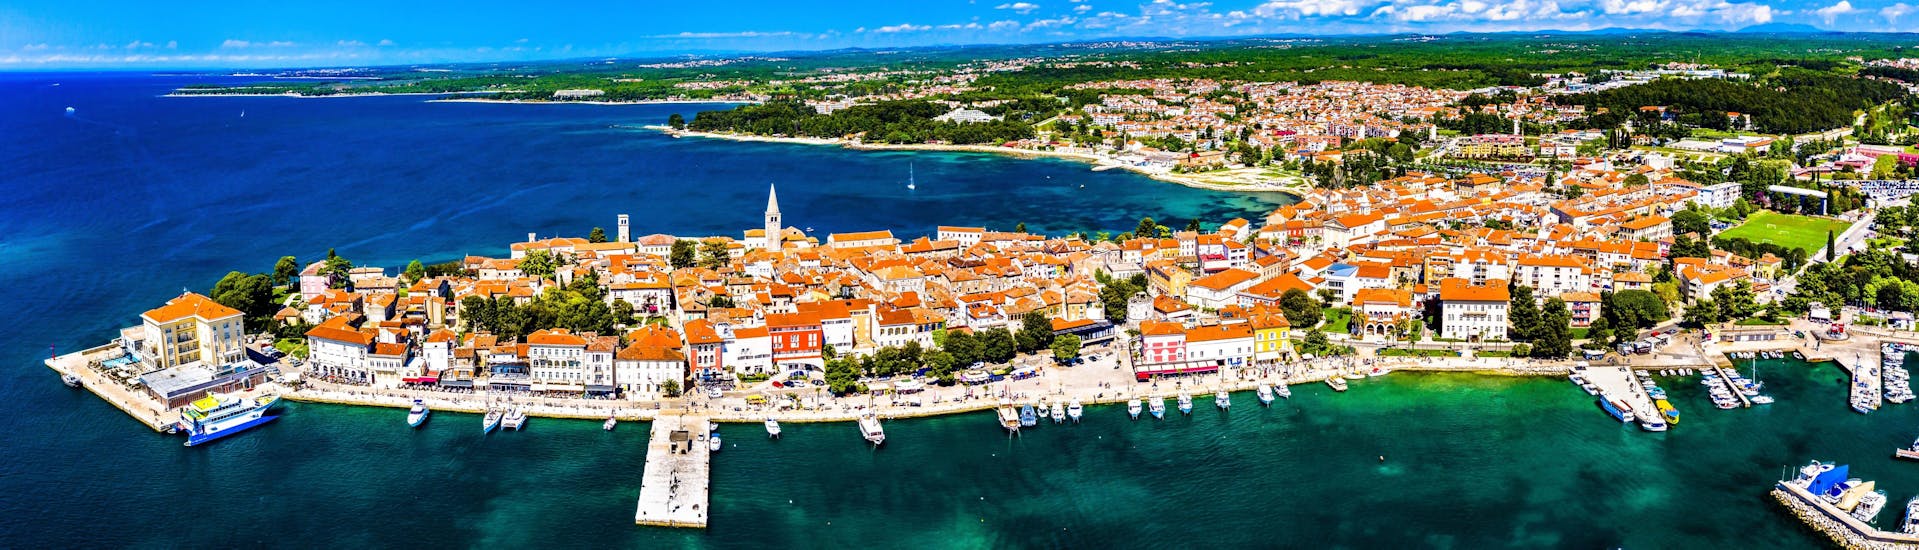 Image of town in Istria where watersports activities take place.